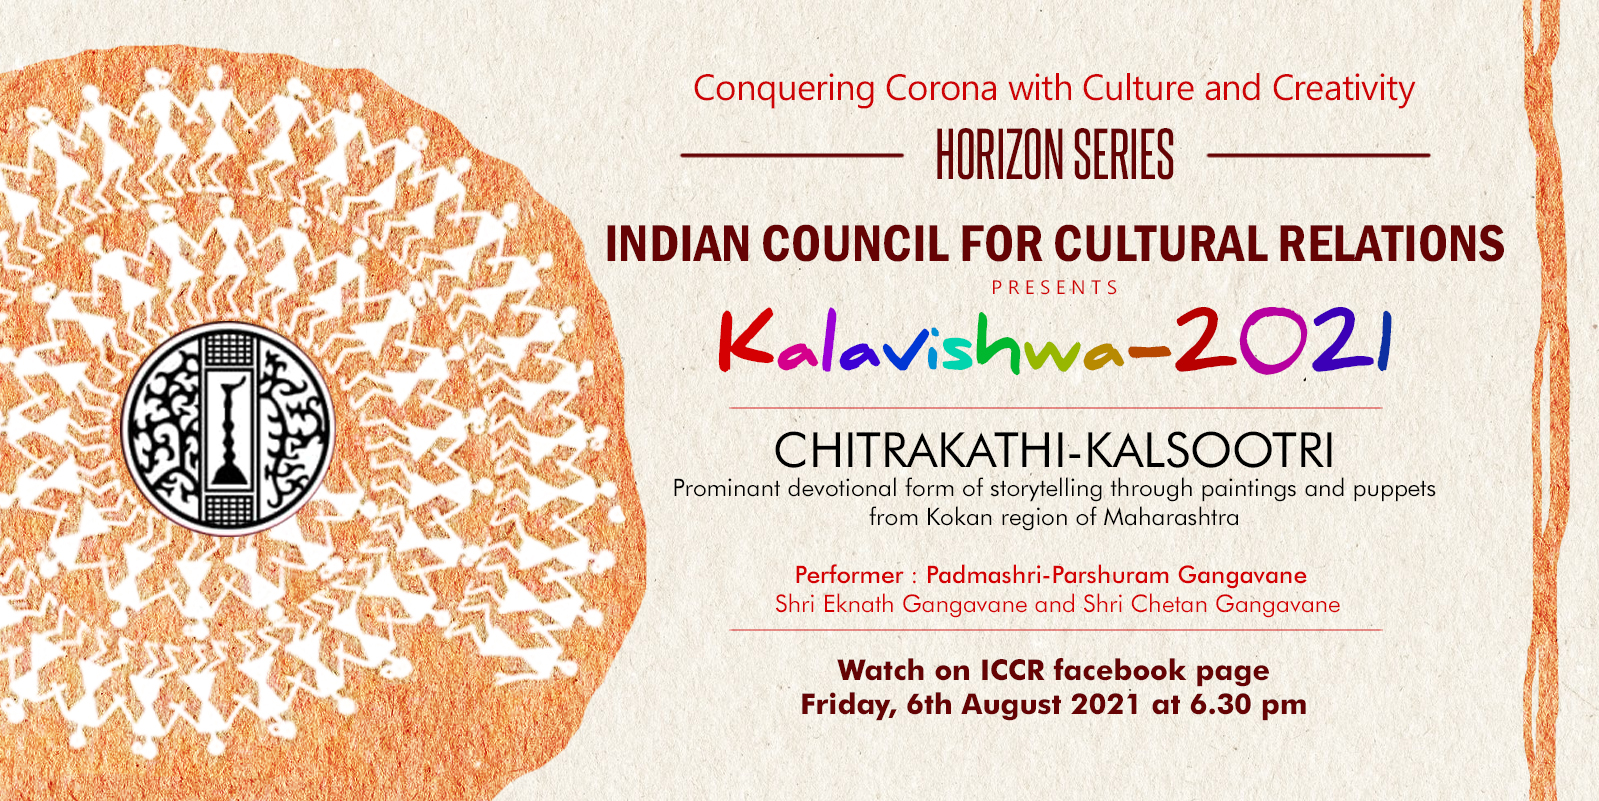 ICCR is presenting the 2rd episode of Kala Vishwa Campaign 2021 presenting Chitrakathi & Kalasootri (Storytelling through paintings and Puppet), on Saturday 6th August 2021 at 6.30 p.m.